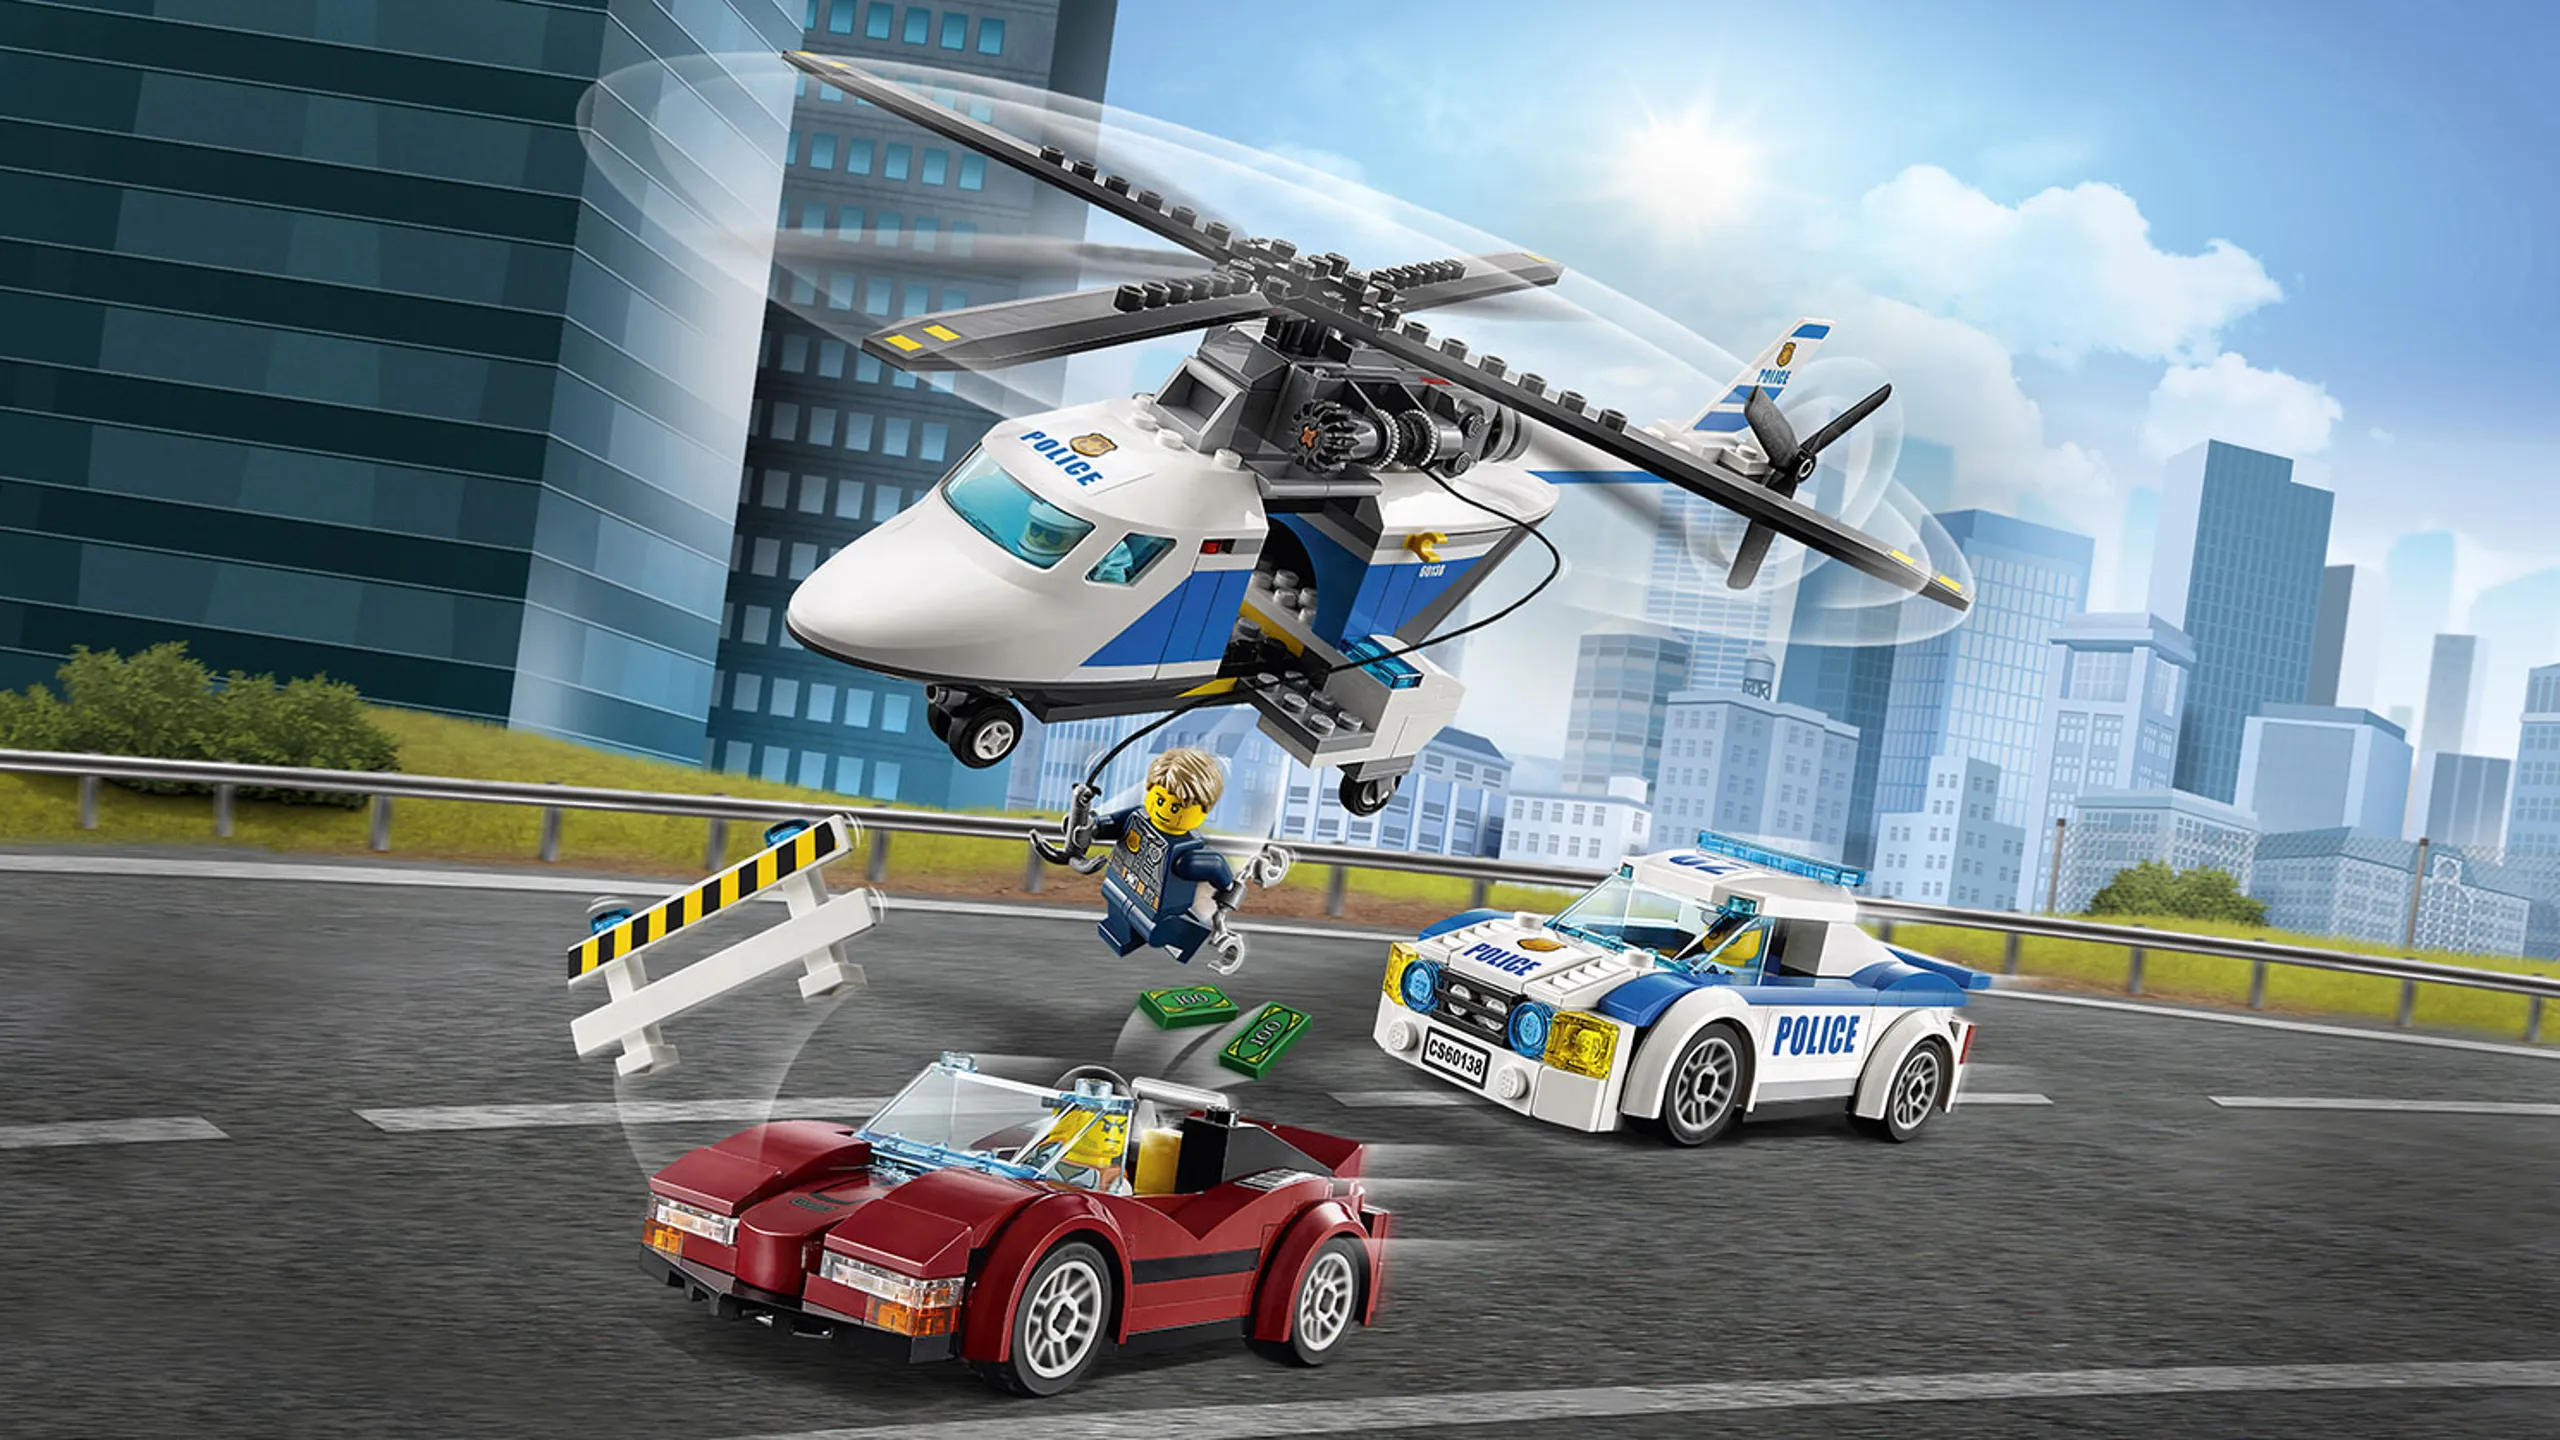 LEGO City Police - 60138 High-Speed Chase - The police helicopter and police car chase the crook who has stolen money.